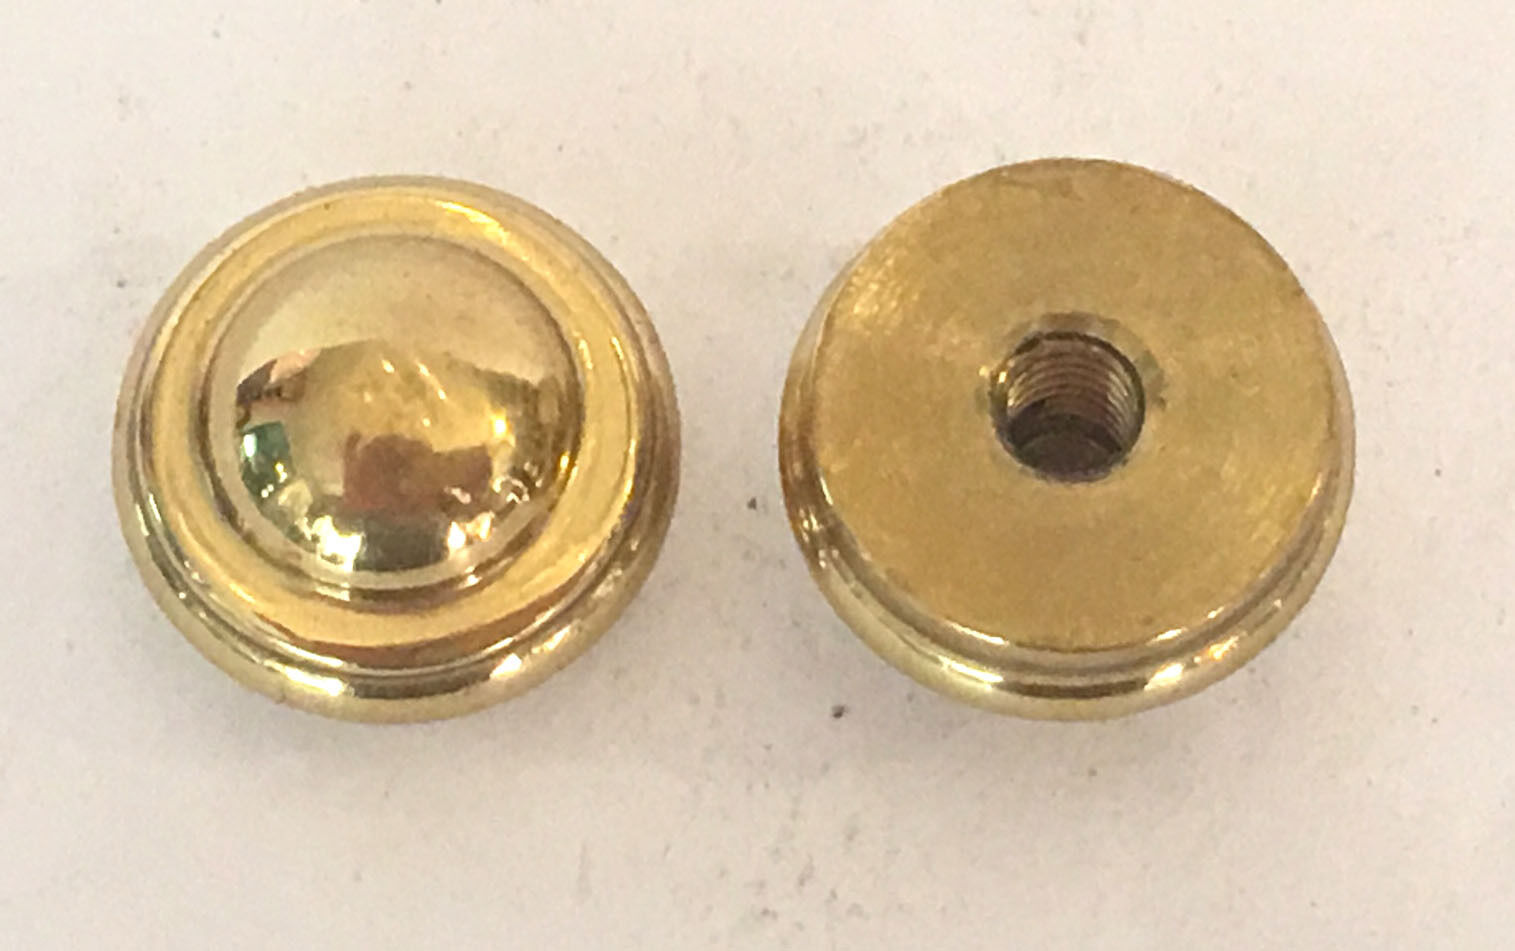 New: Lot of 2 solid brass polished cap nuts tapped #8-32 screw hole lamp parts